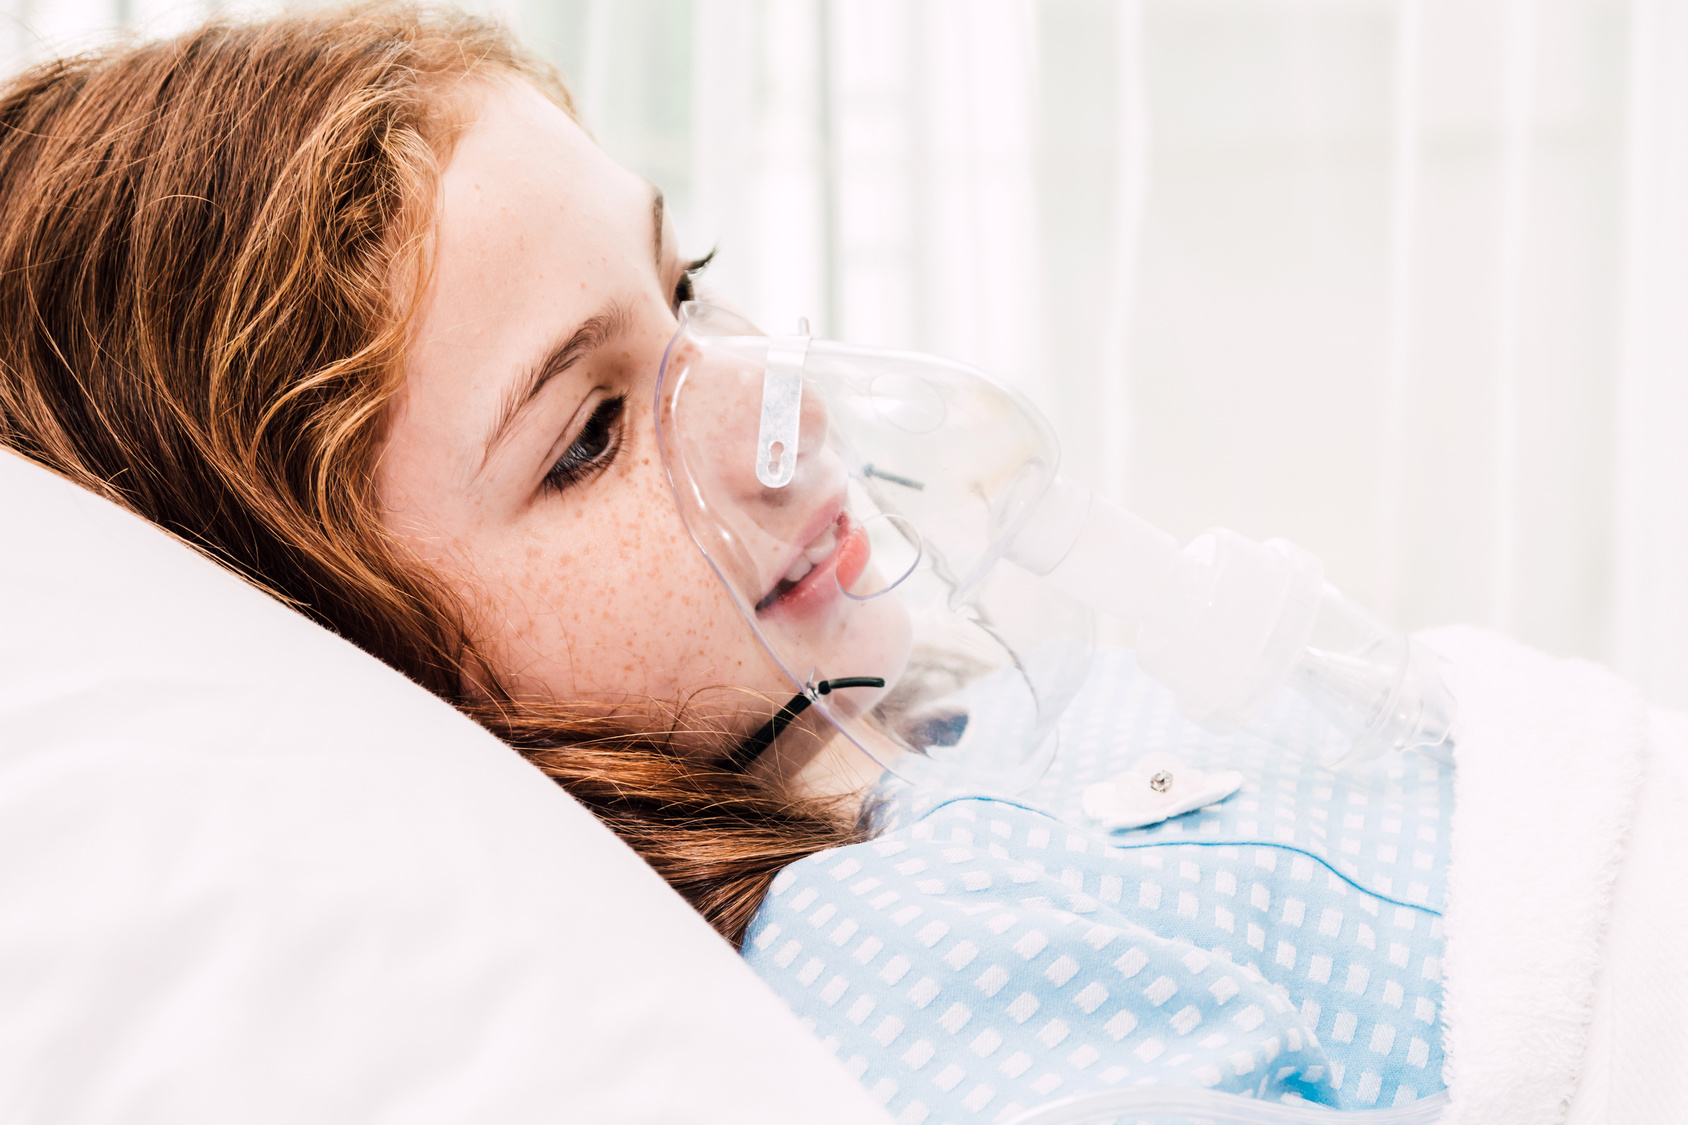 Girl in hospital bed with oxygen mask